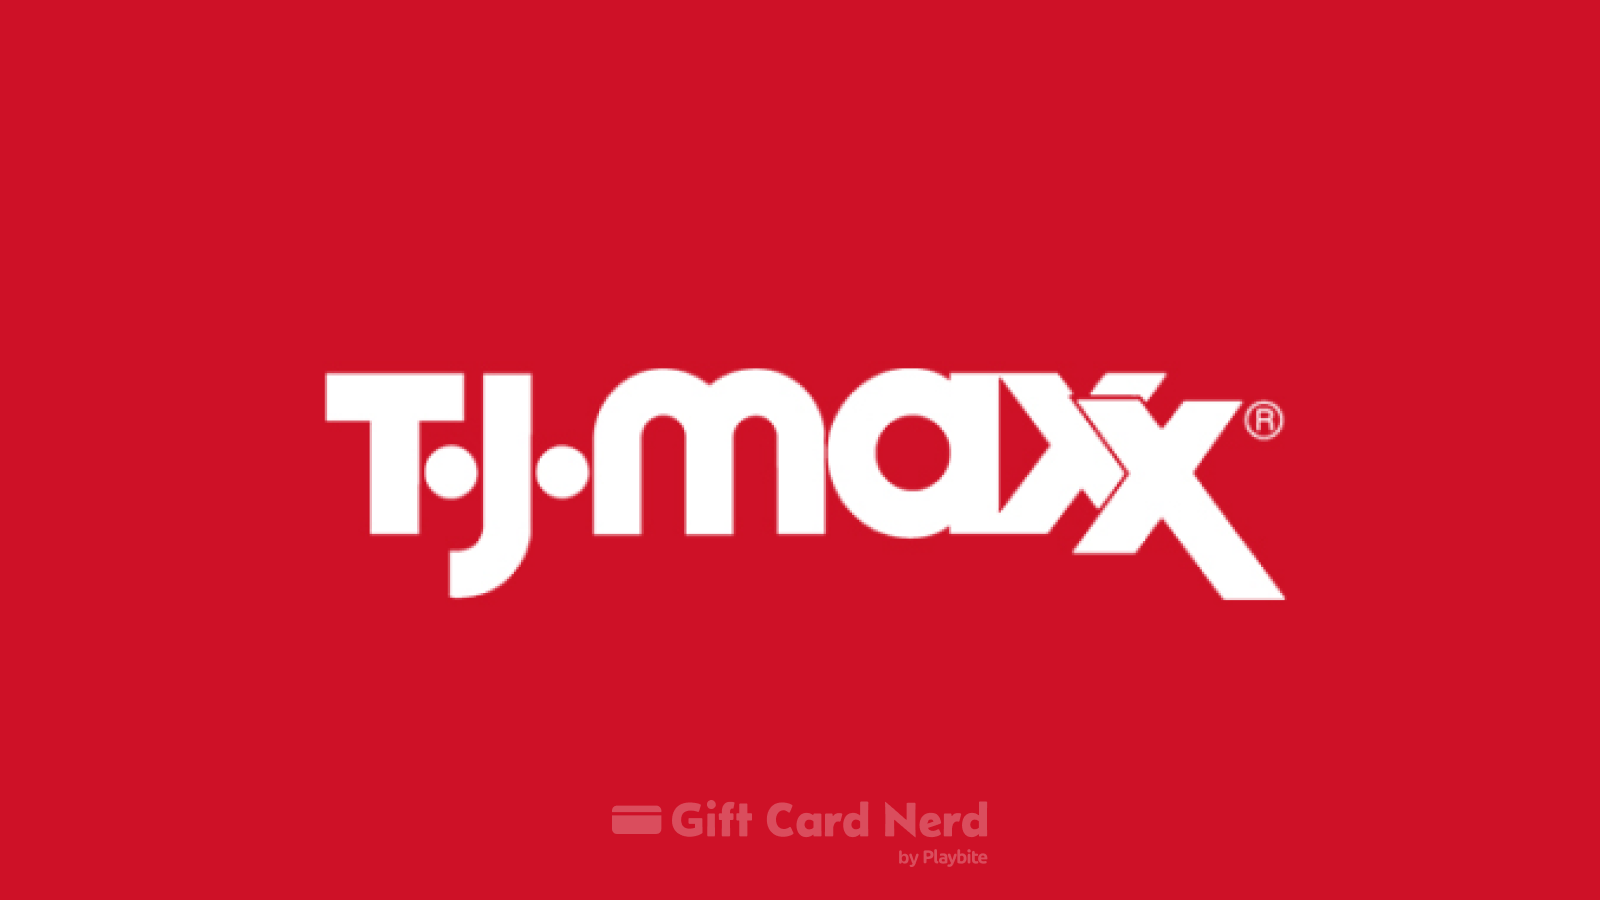 Can You Use a TJ Maxx Gift Card on PayPal?